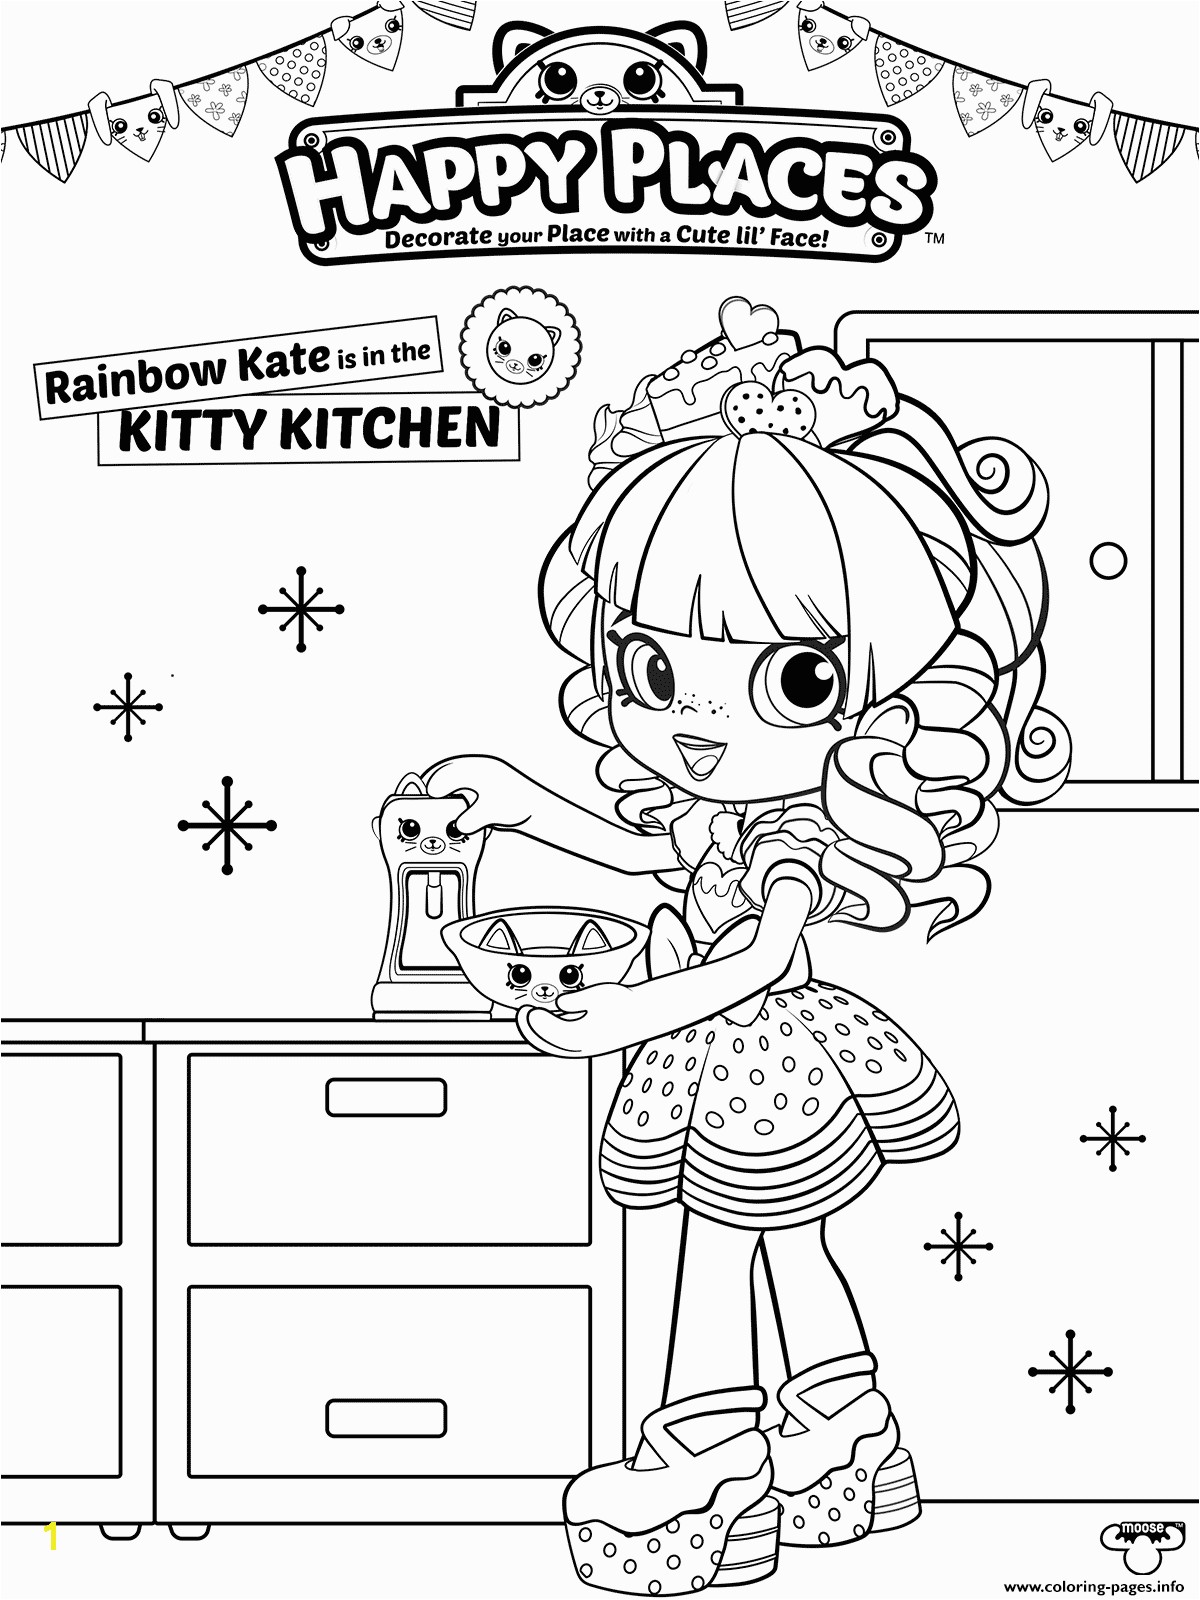 Wanted Cheapest Place To Print Color Pages Shopkins Happy Places Coloring Bv Pinterest